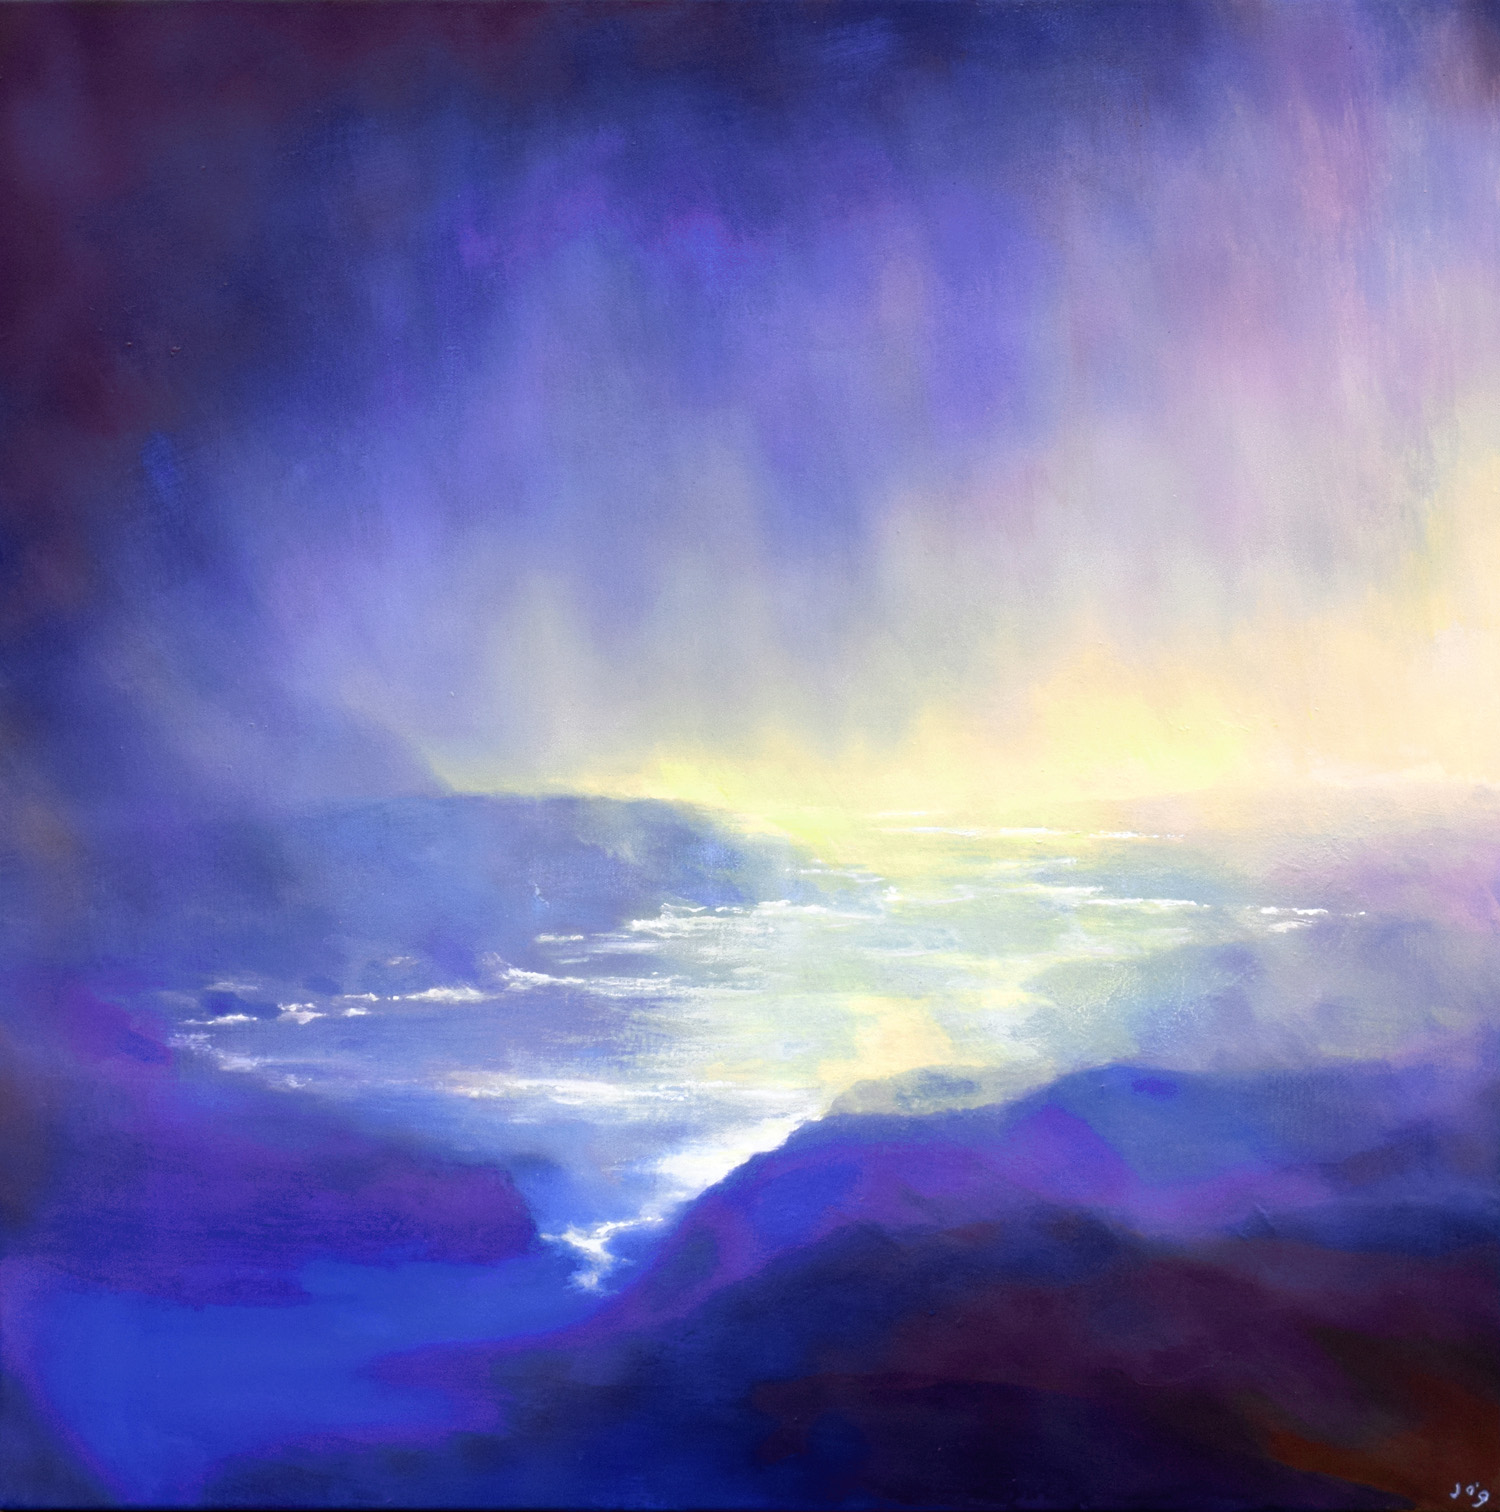 Atmospheric Seascape Painting With Veil of Rain | The Spirit of Water VIII by John O'Grady